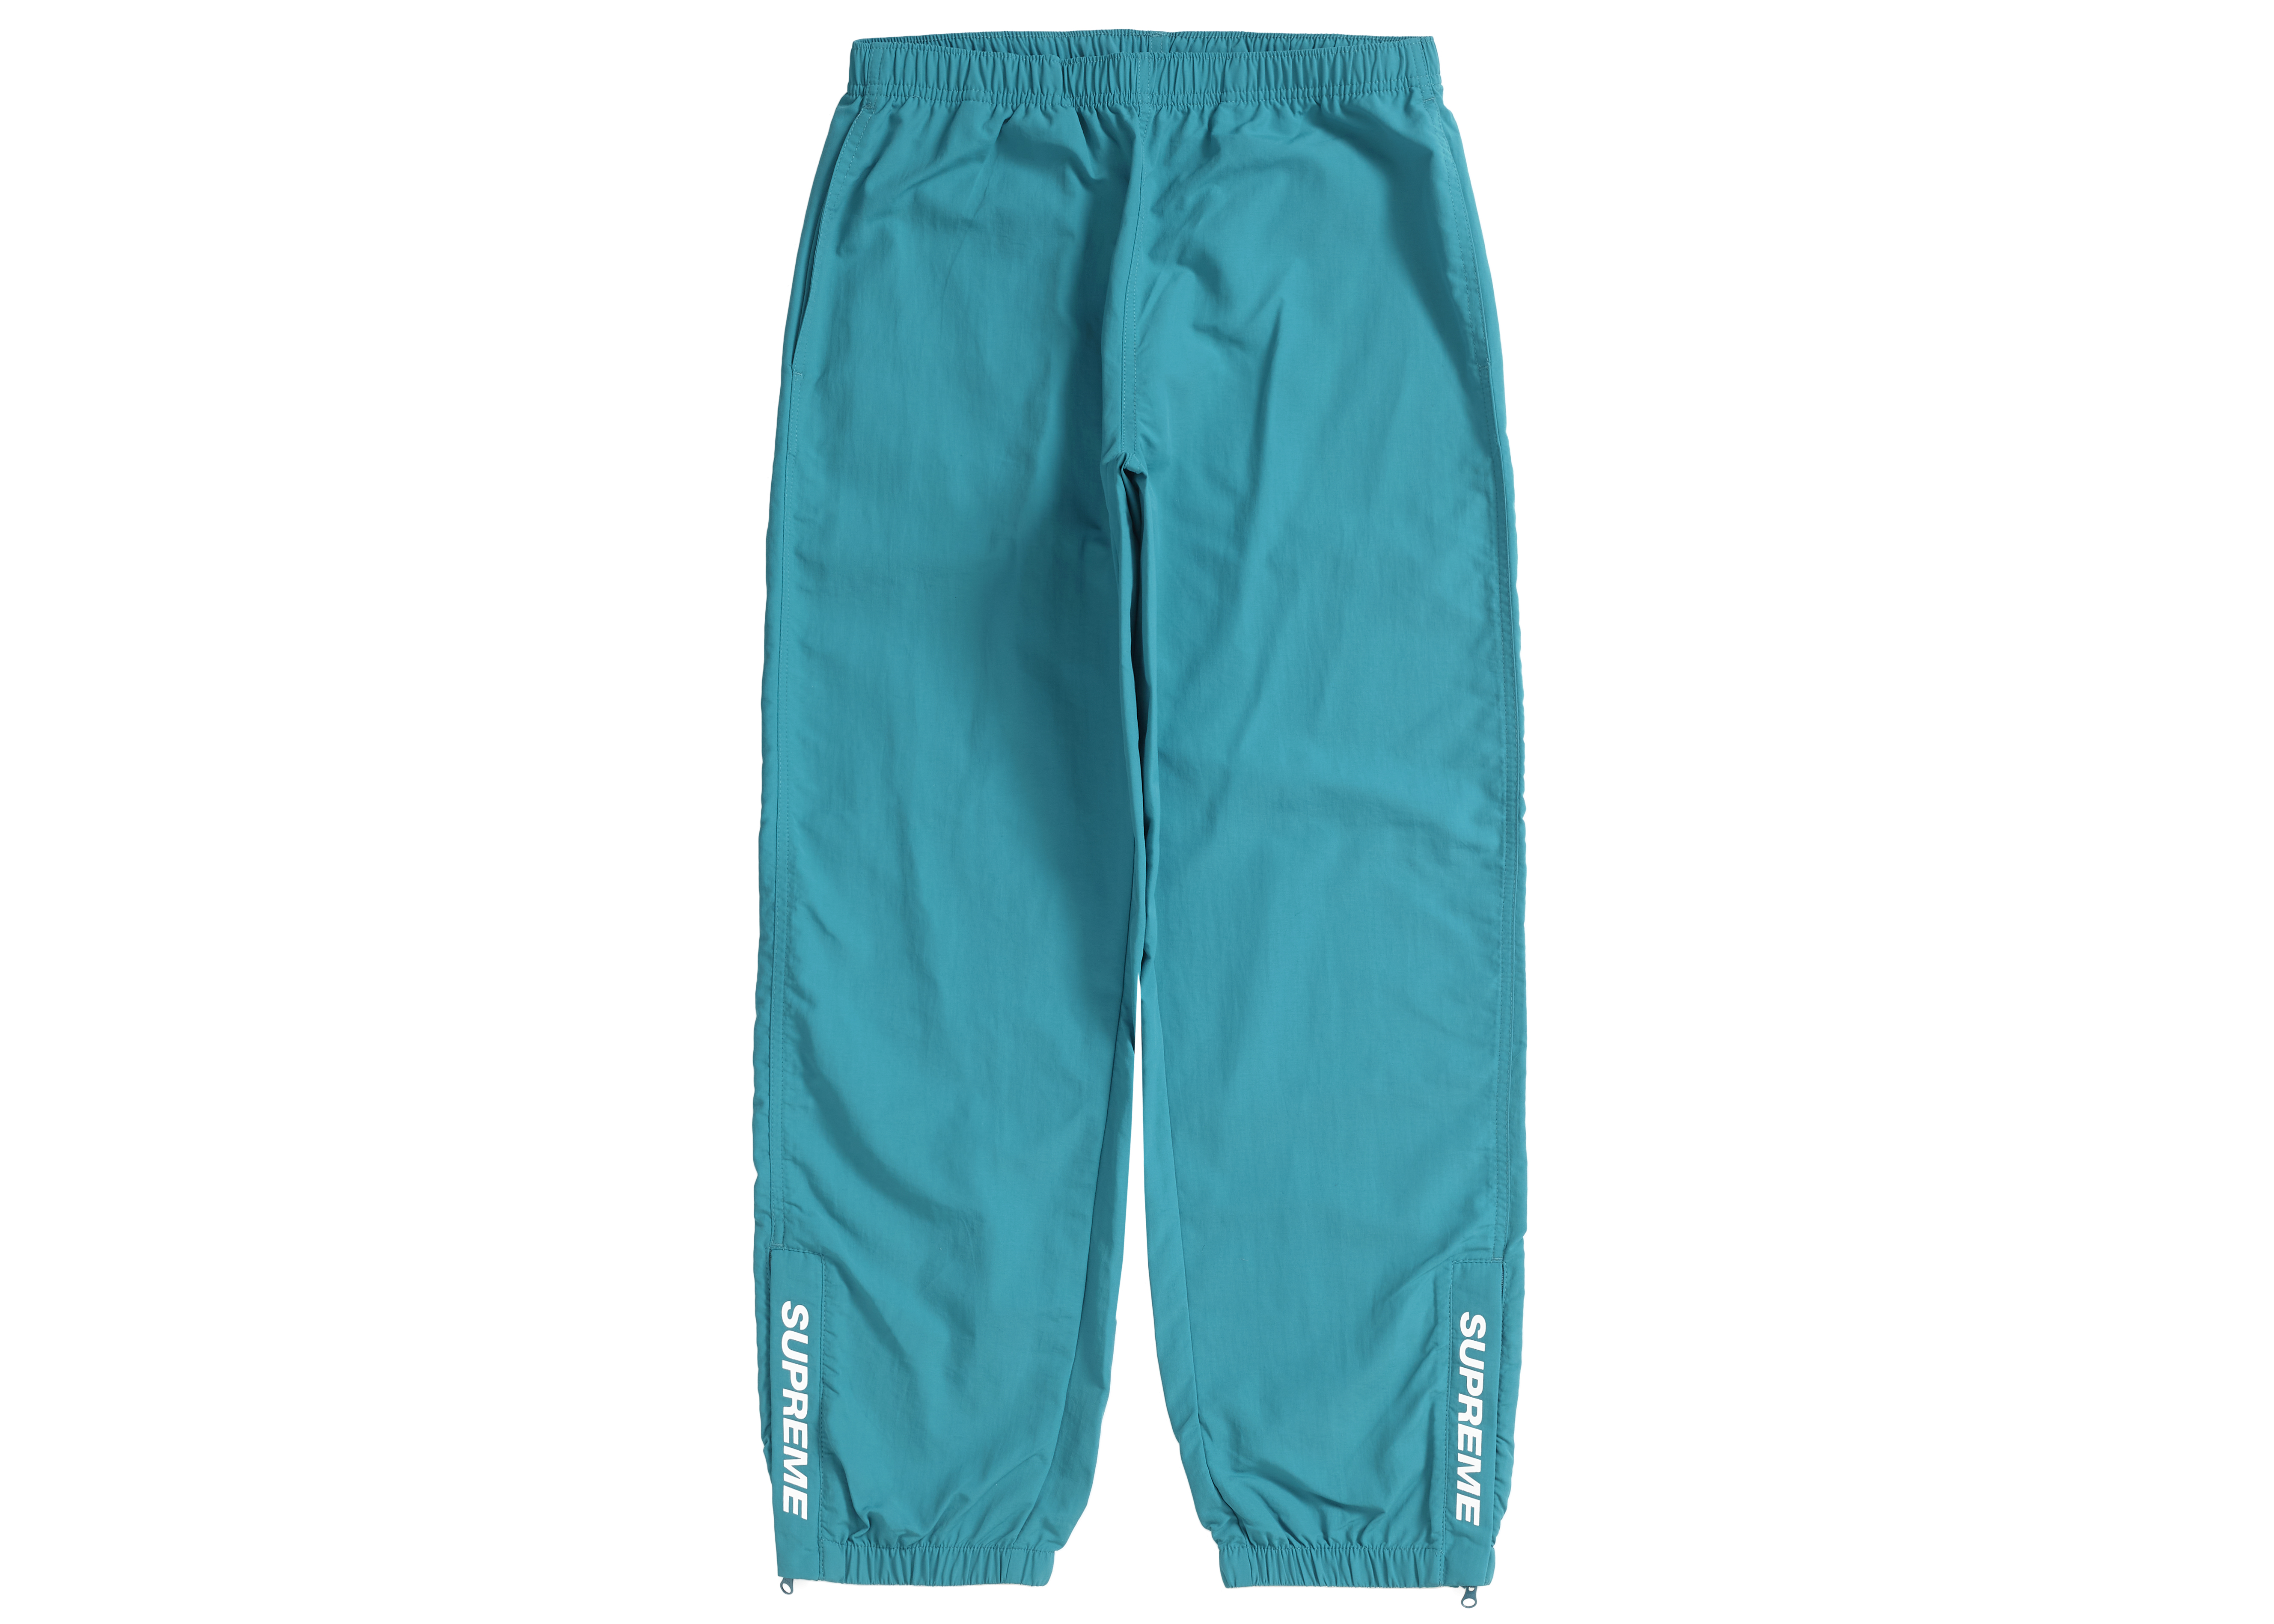 Supreme Warm Up Pant Bright Teal